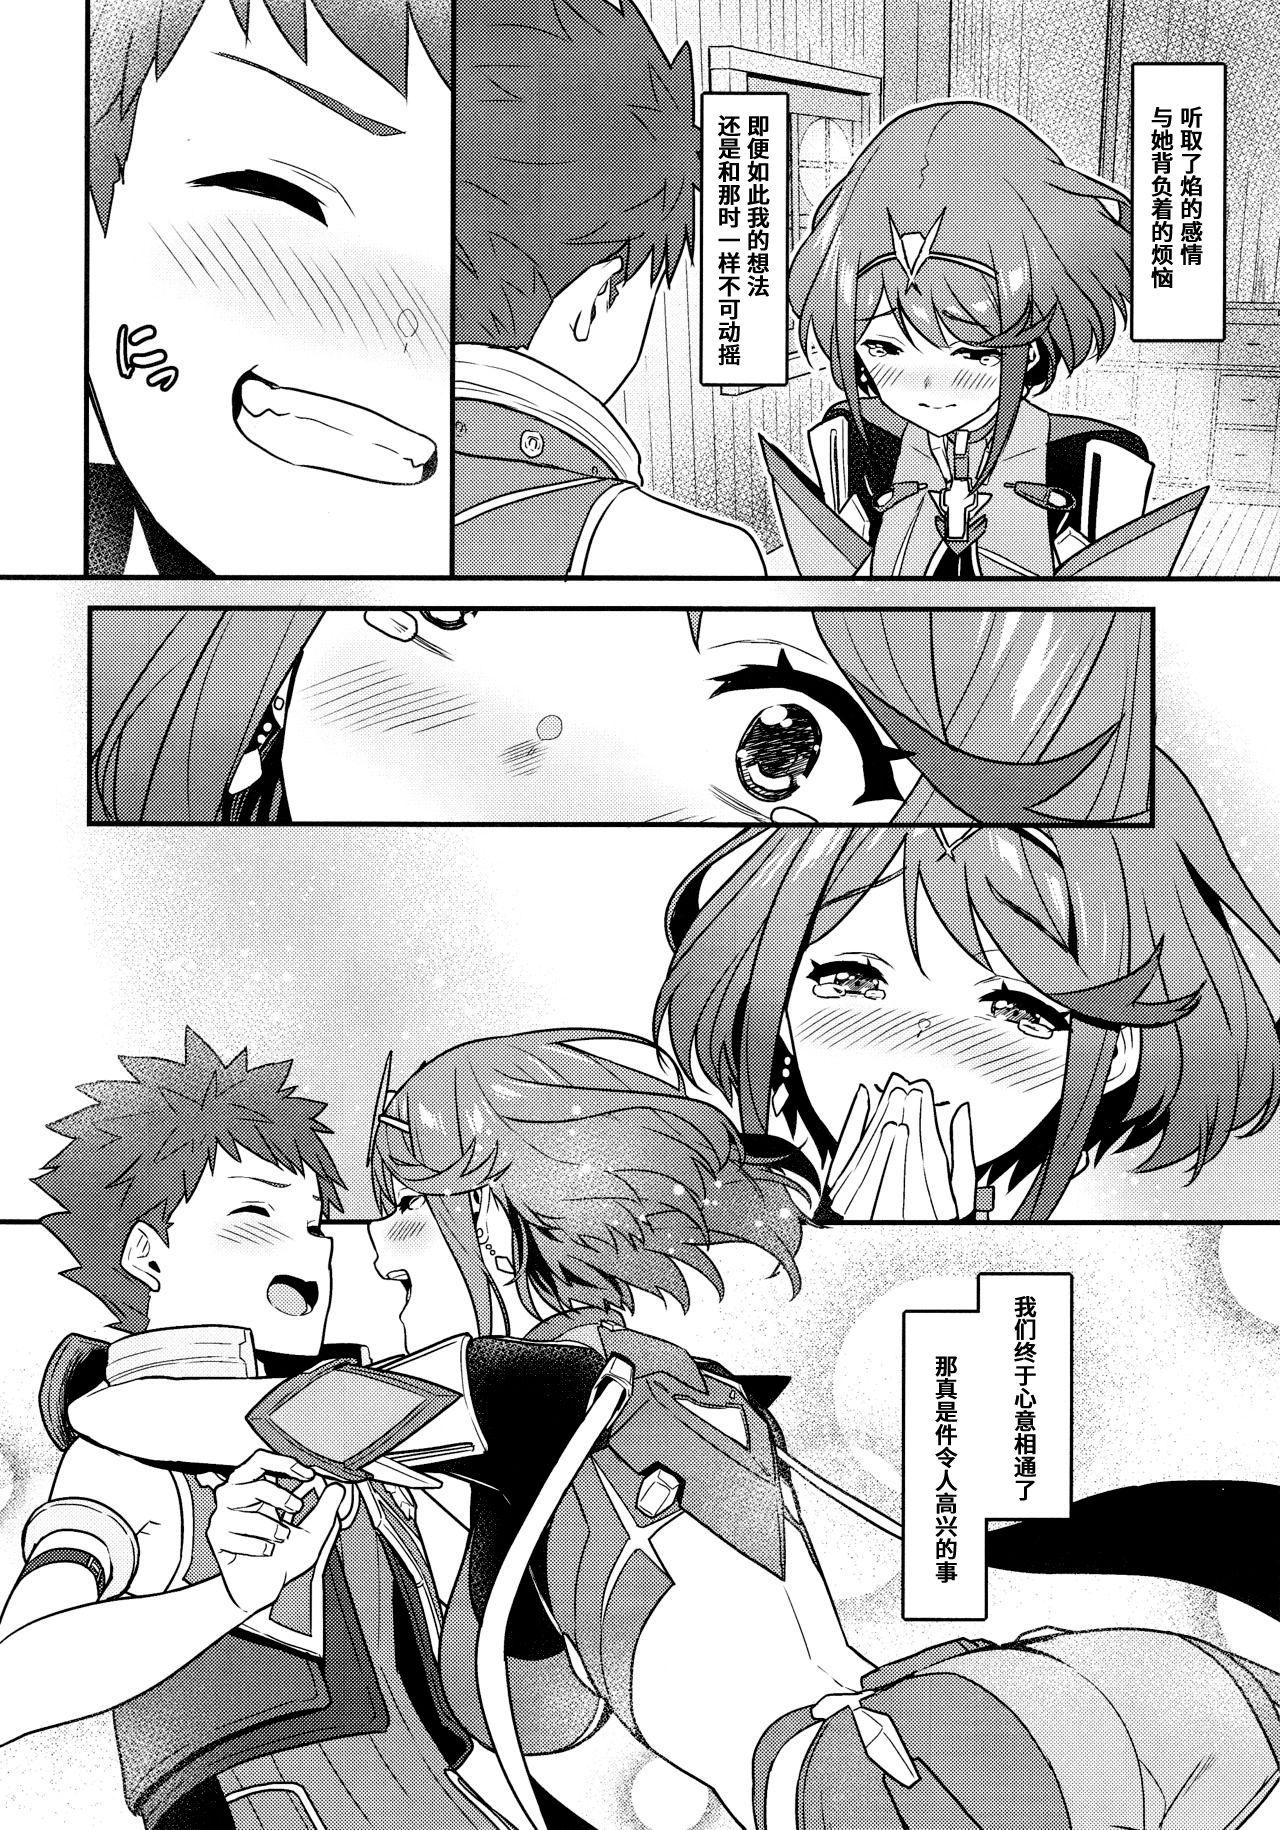 Public Chouyou no Naka e to - Xenoblade chronicles 2 Pussy To Mouth - Page 5